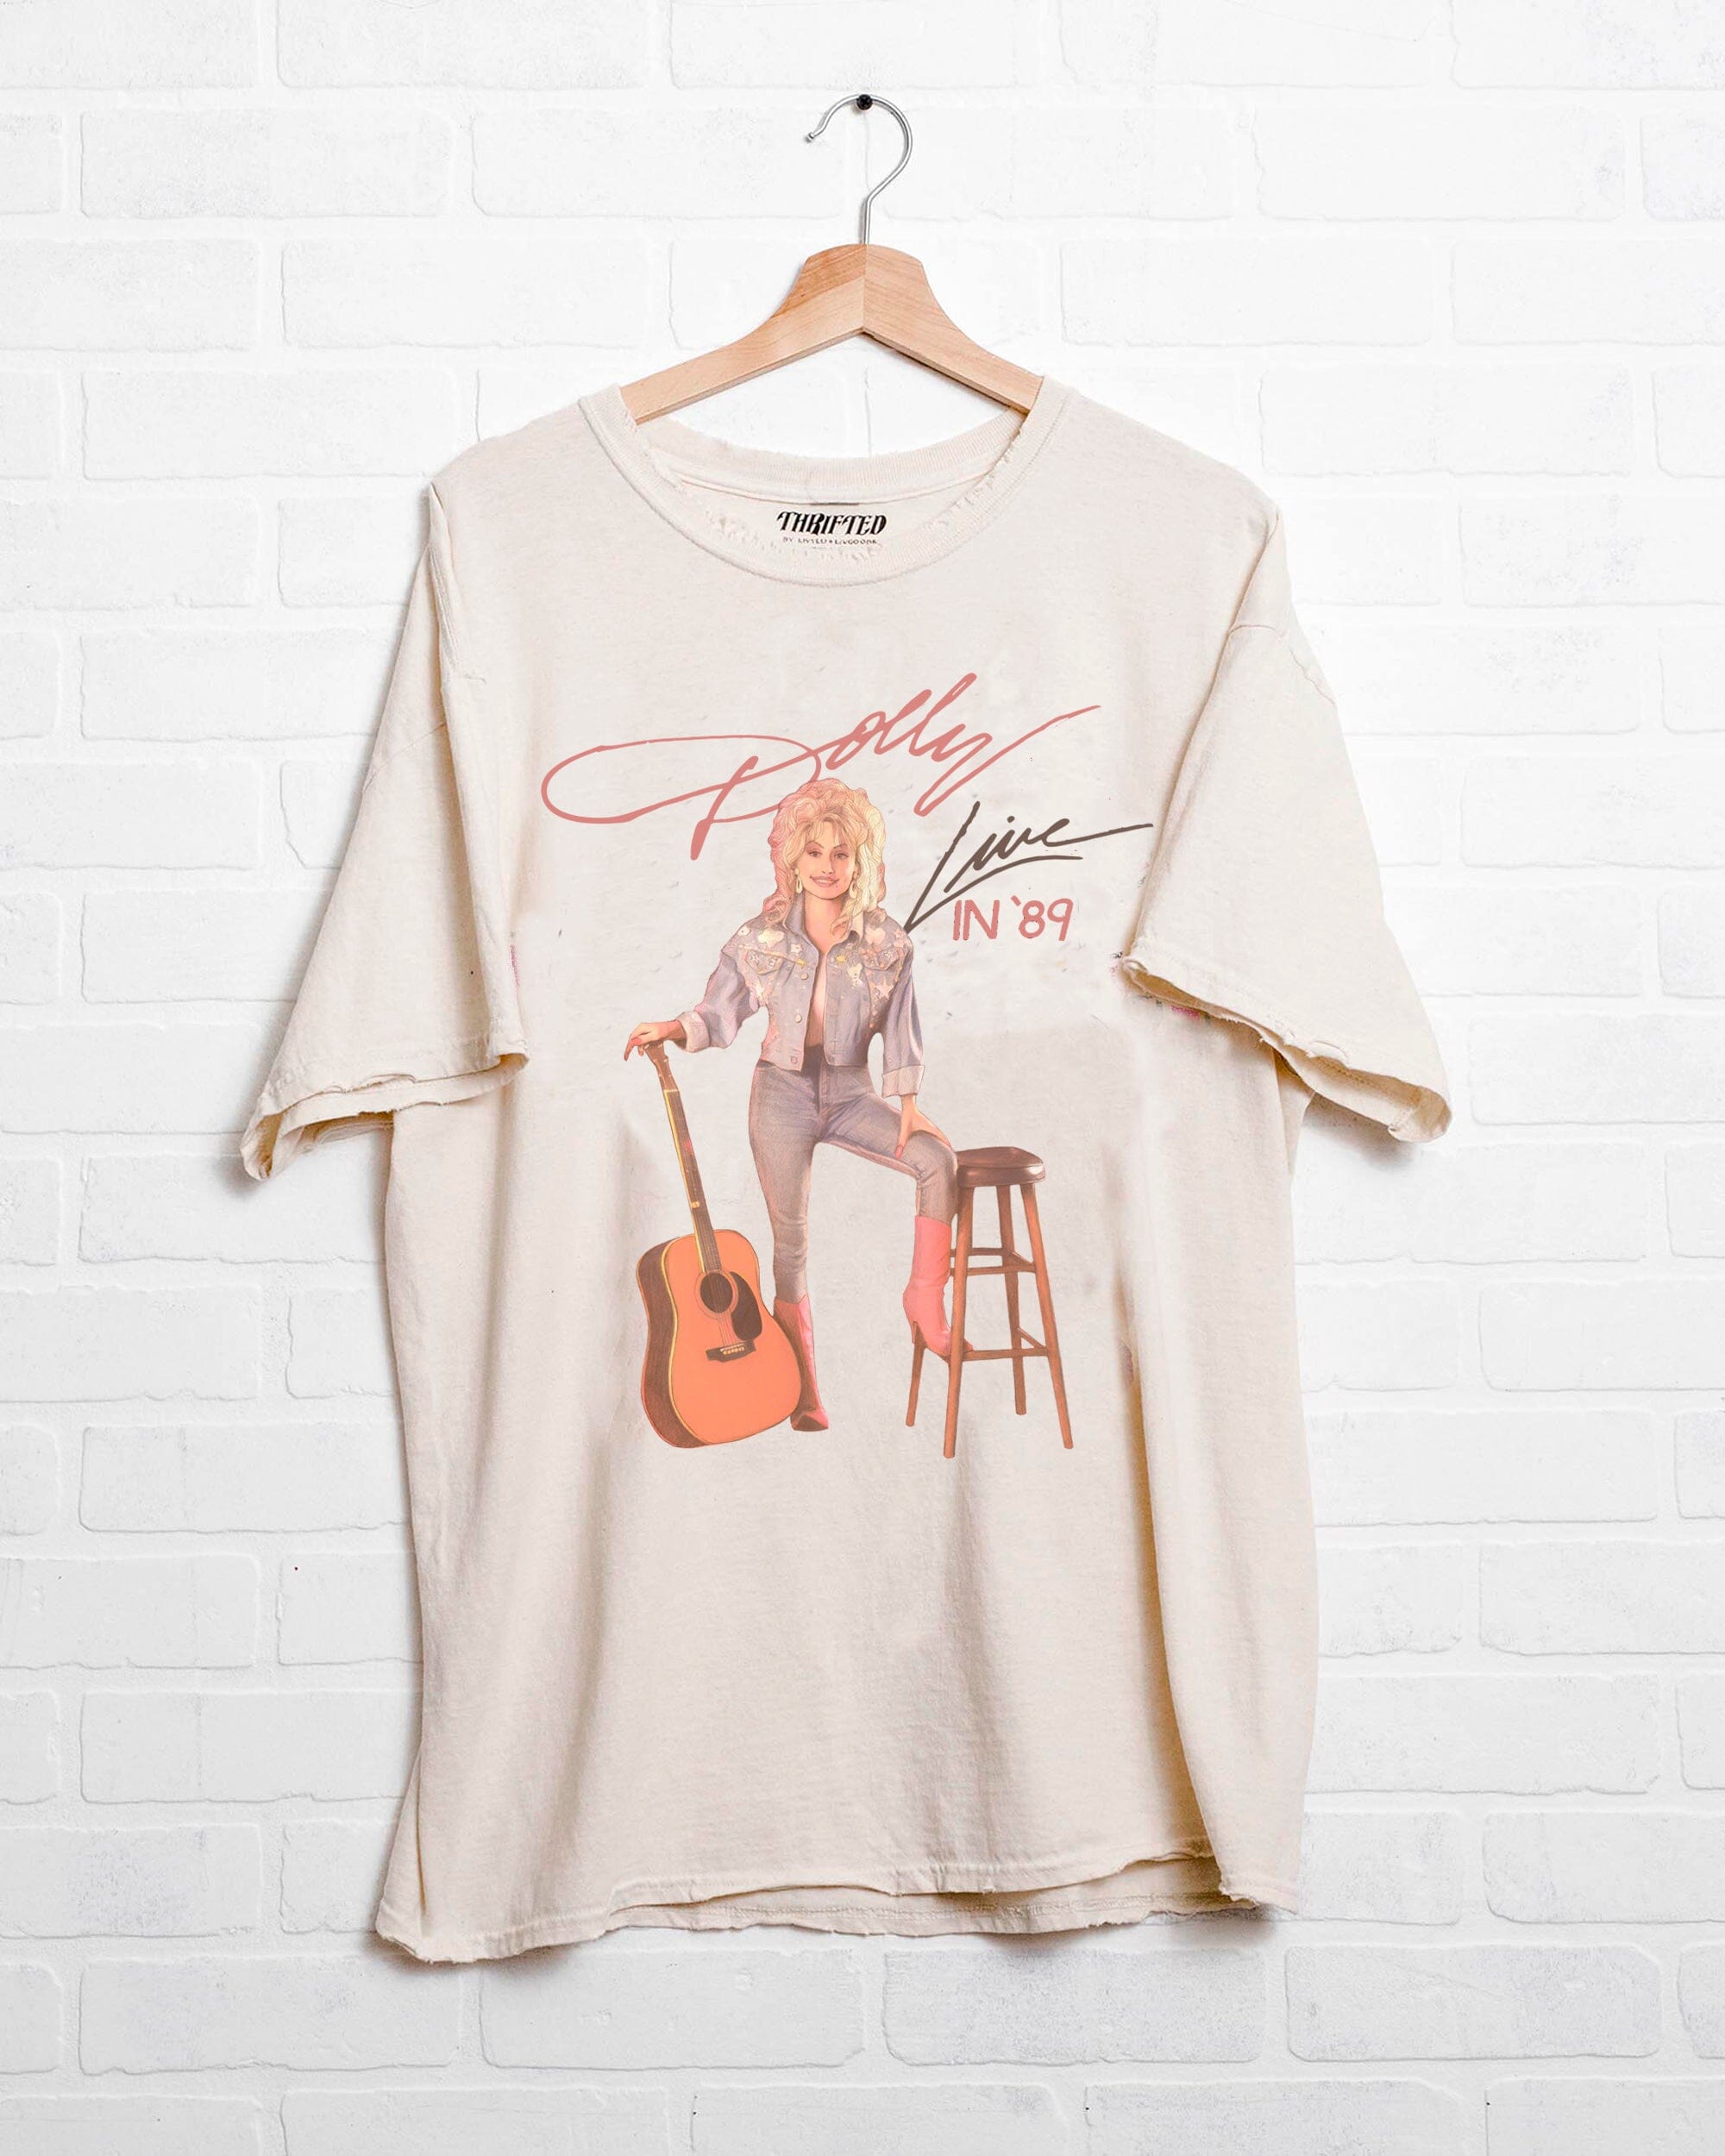 Dolly Parton Live in '89 Off White Thrifted Distressed Tee